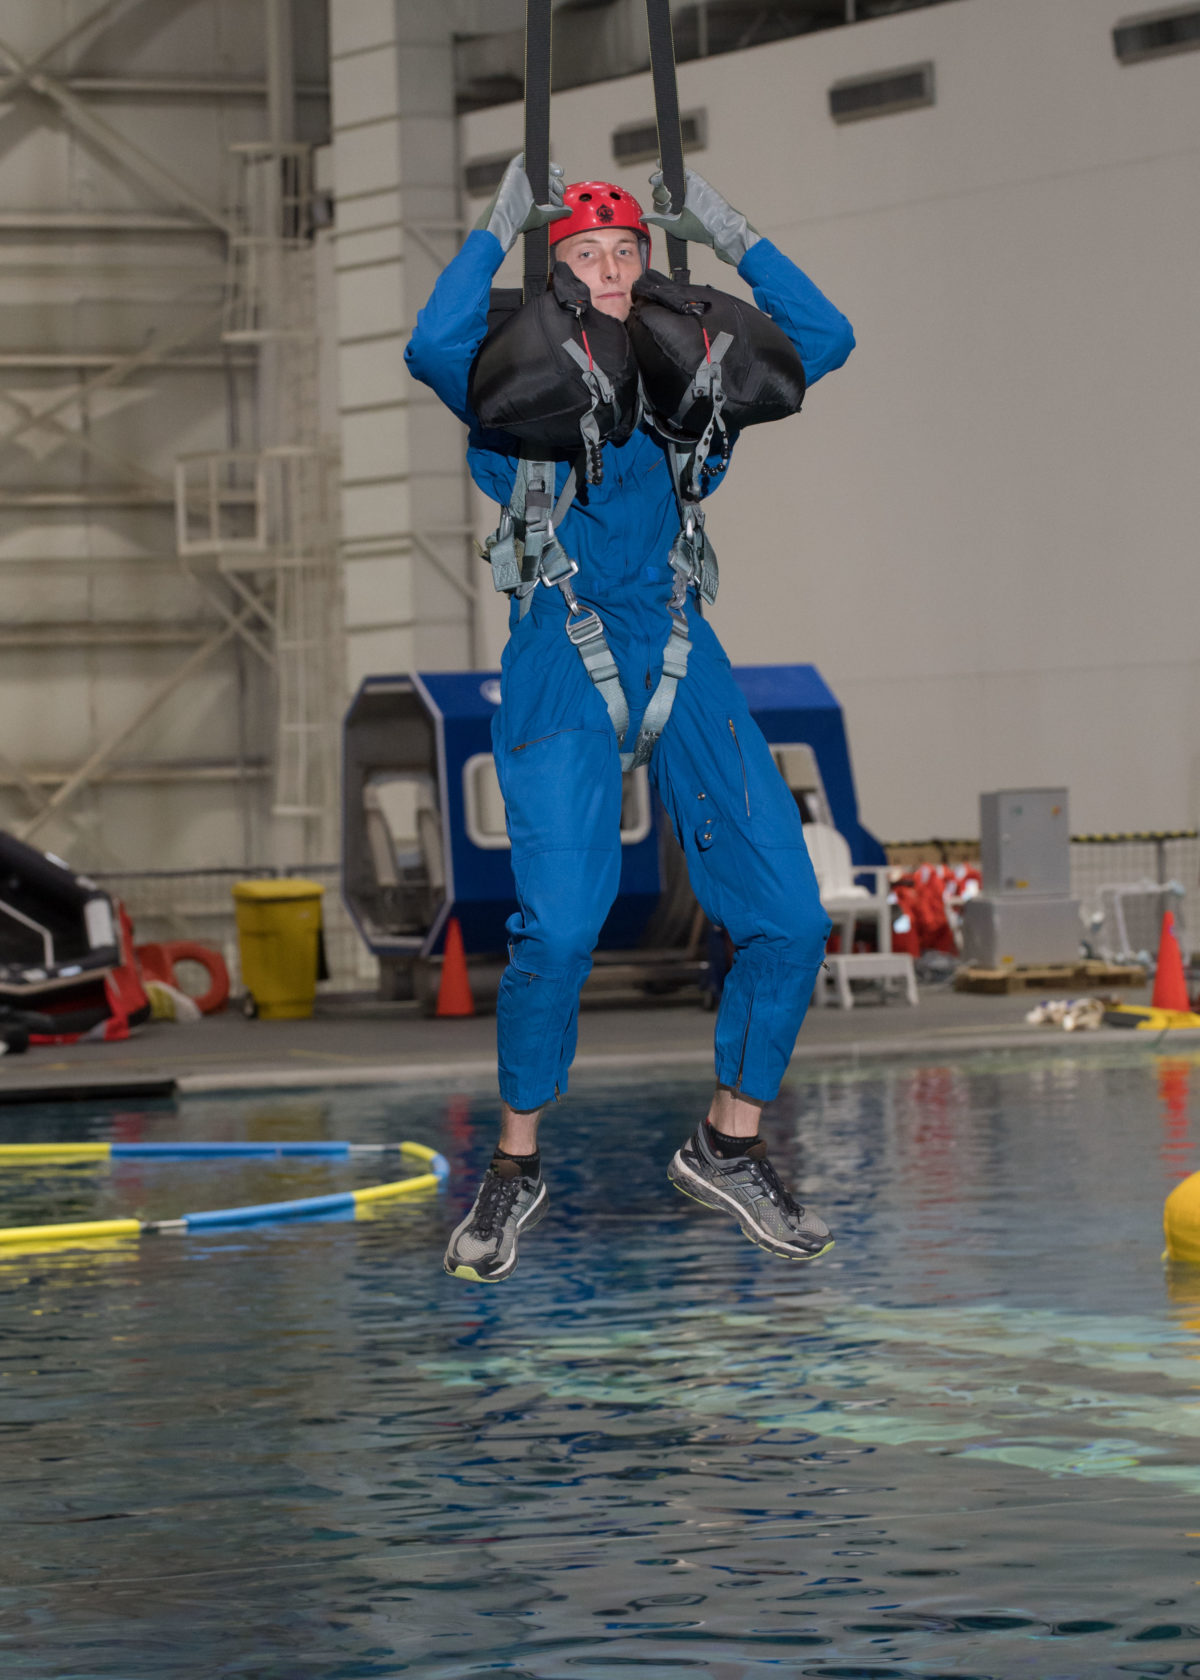 Hoburg hanging from a harness during water survival training